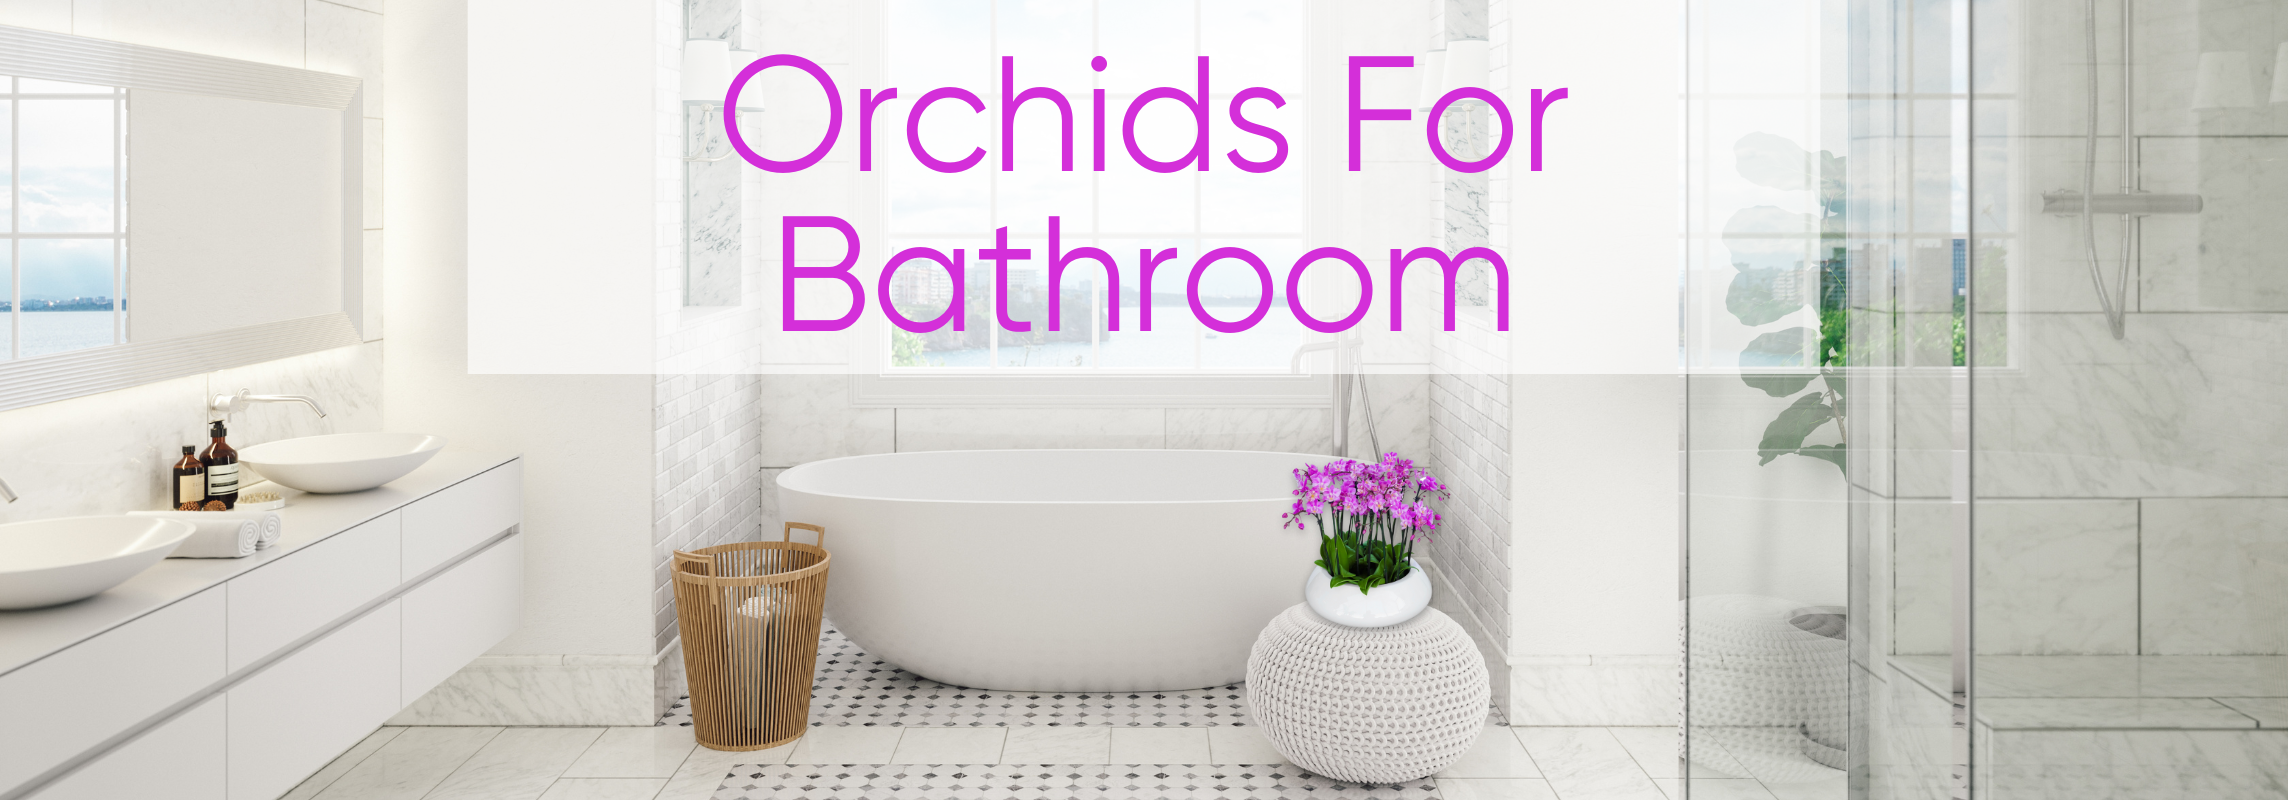 orchids for bathroom